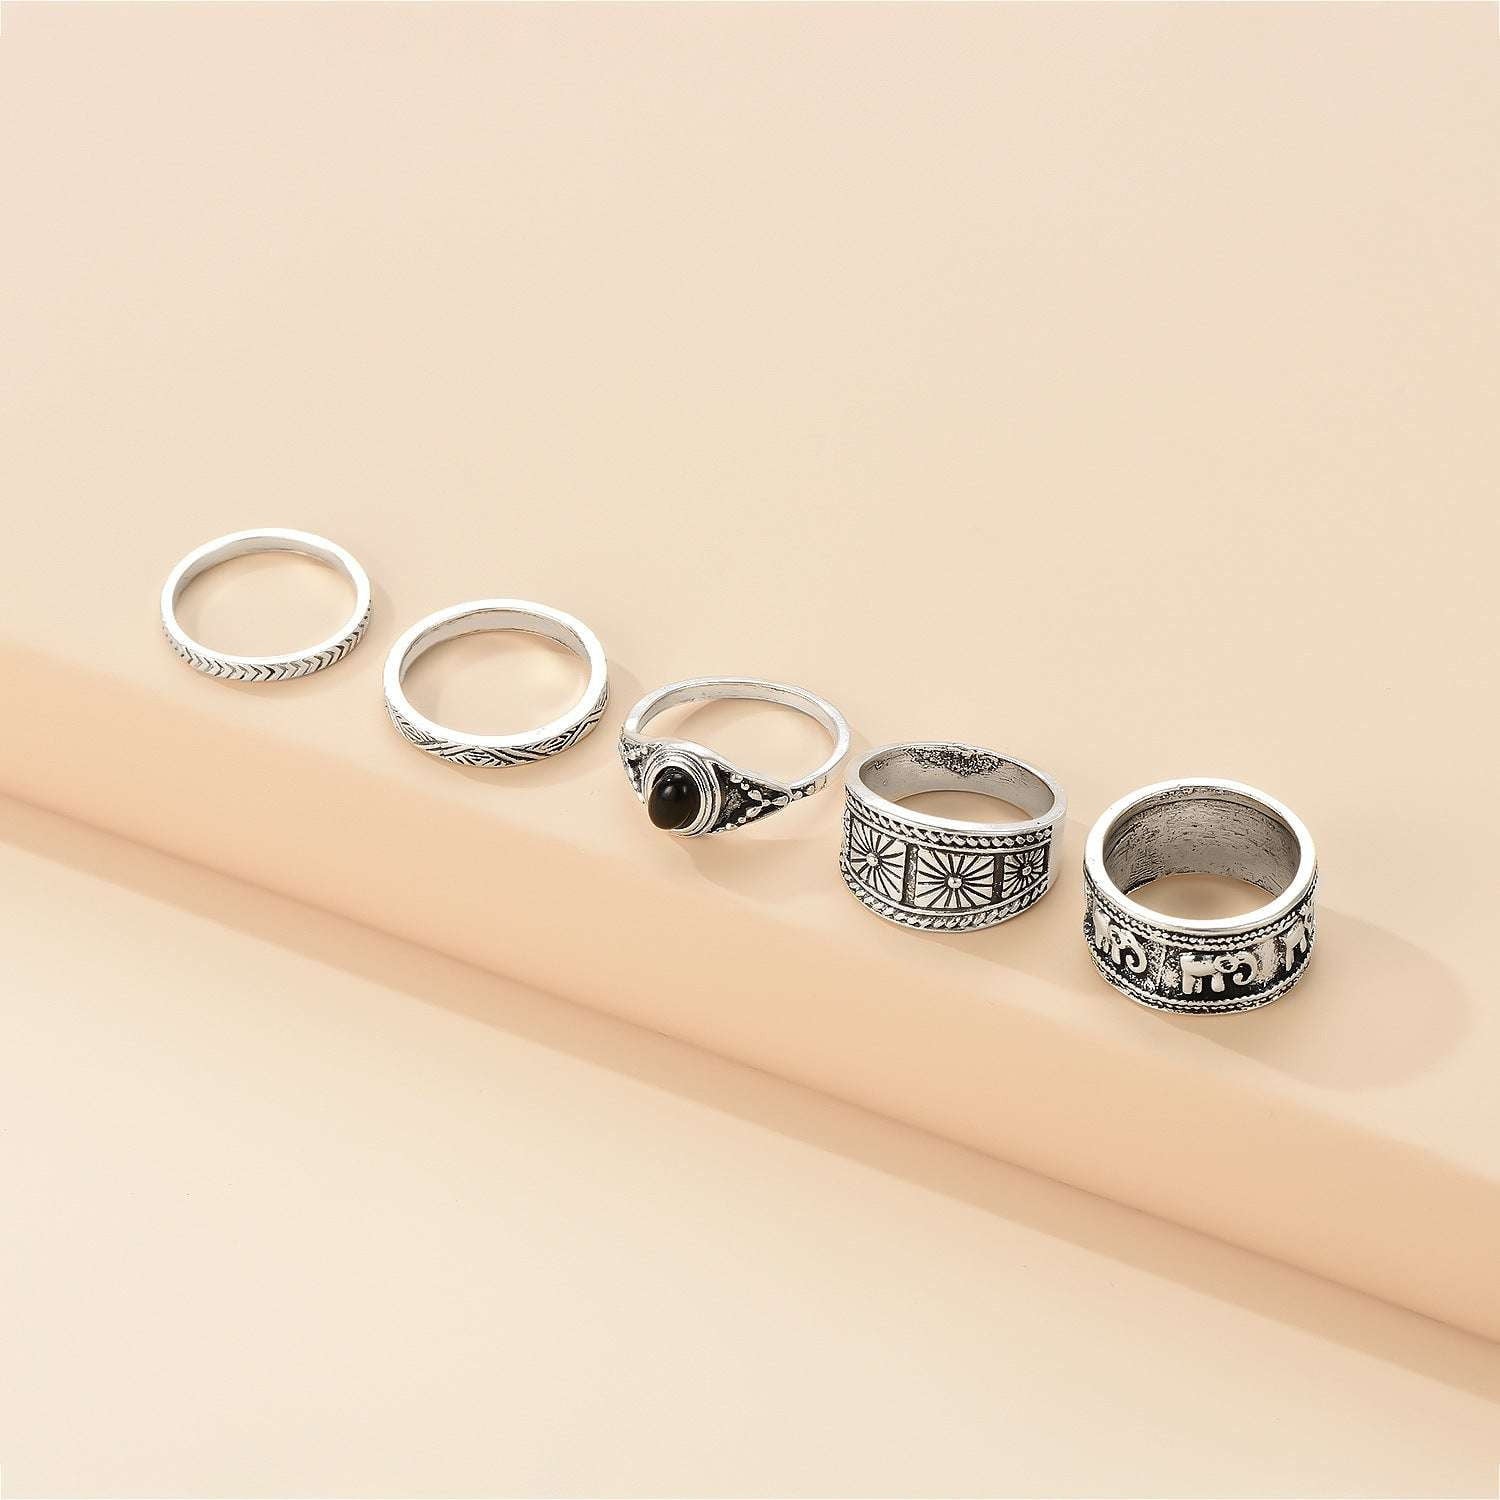 Ancient Silver Ring, Retro Zodiac Rings, Unisex Ring Collection - available at Sparq Mart